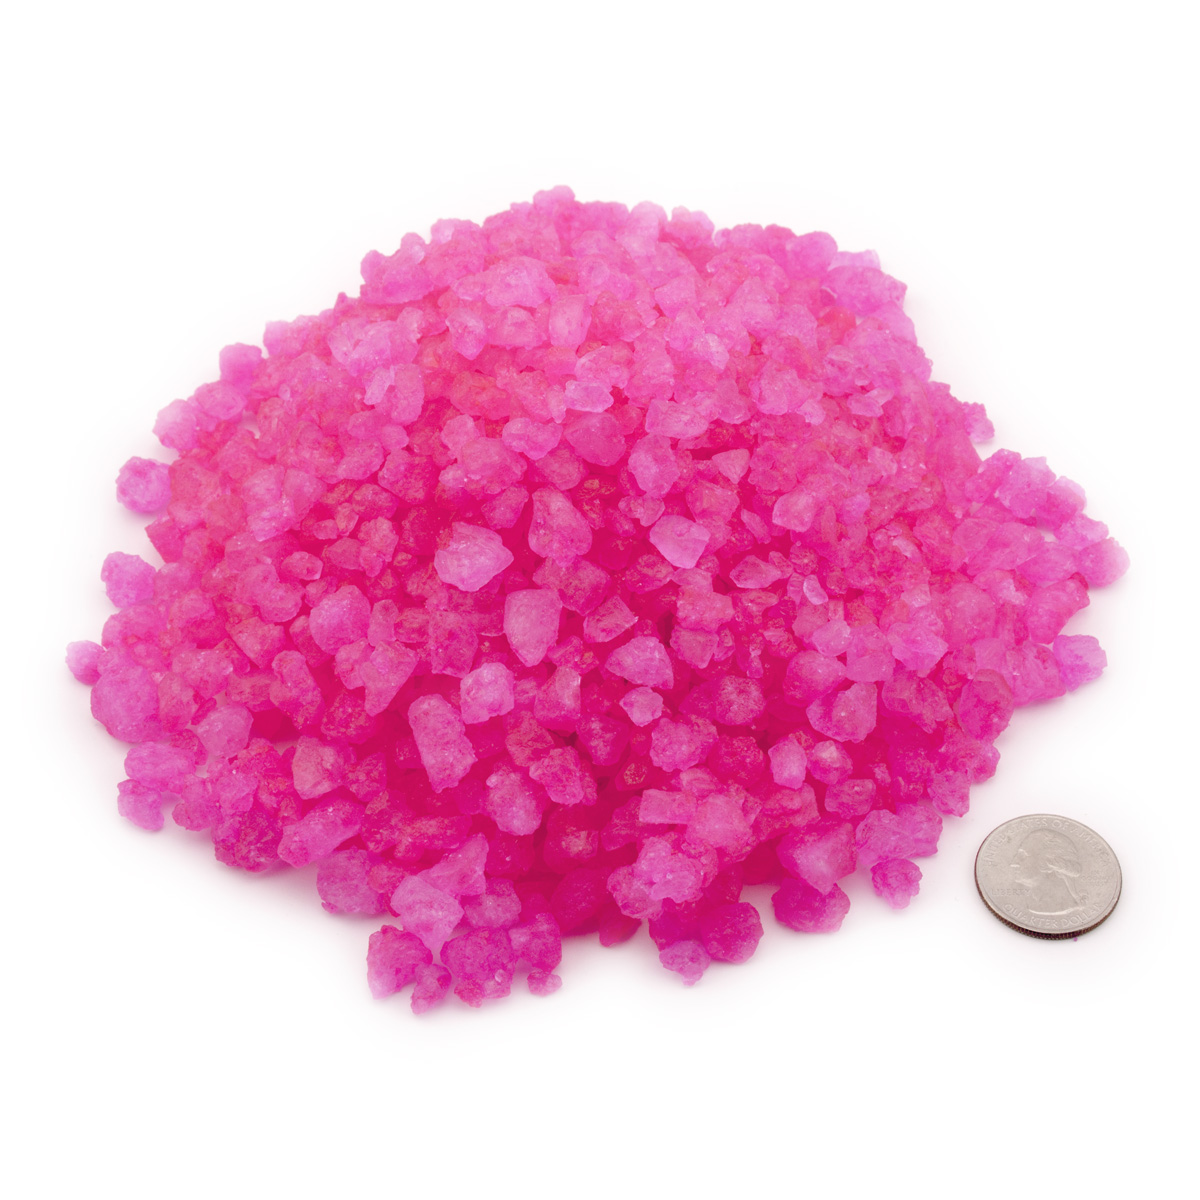 Rock Candy Crystals Pink Cotton Candy